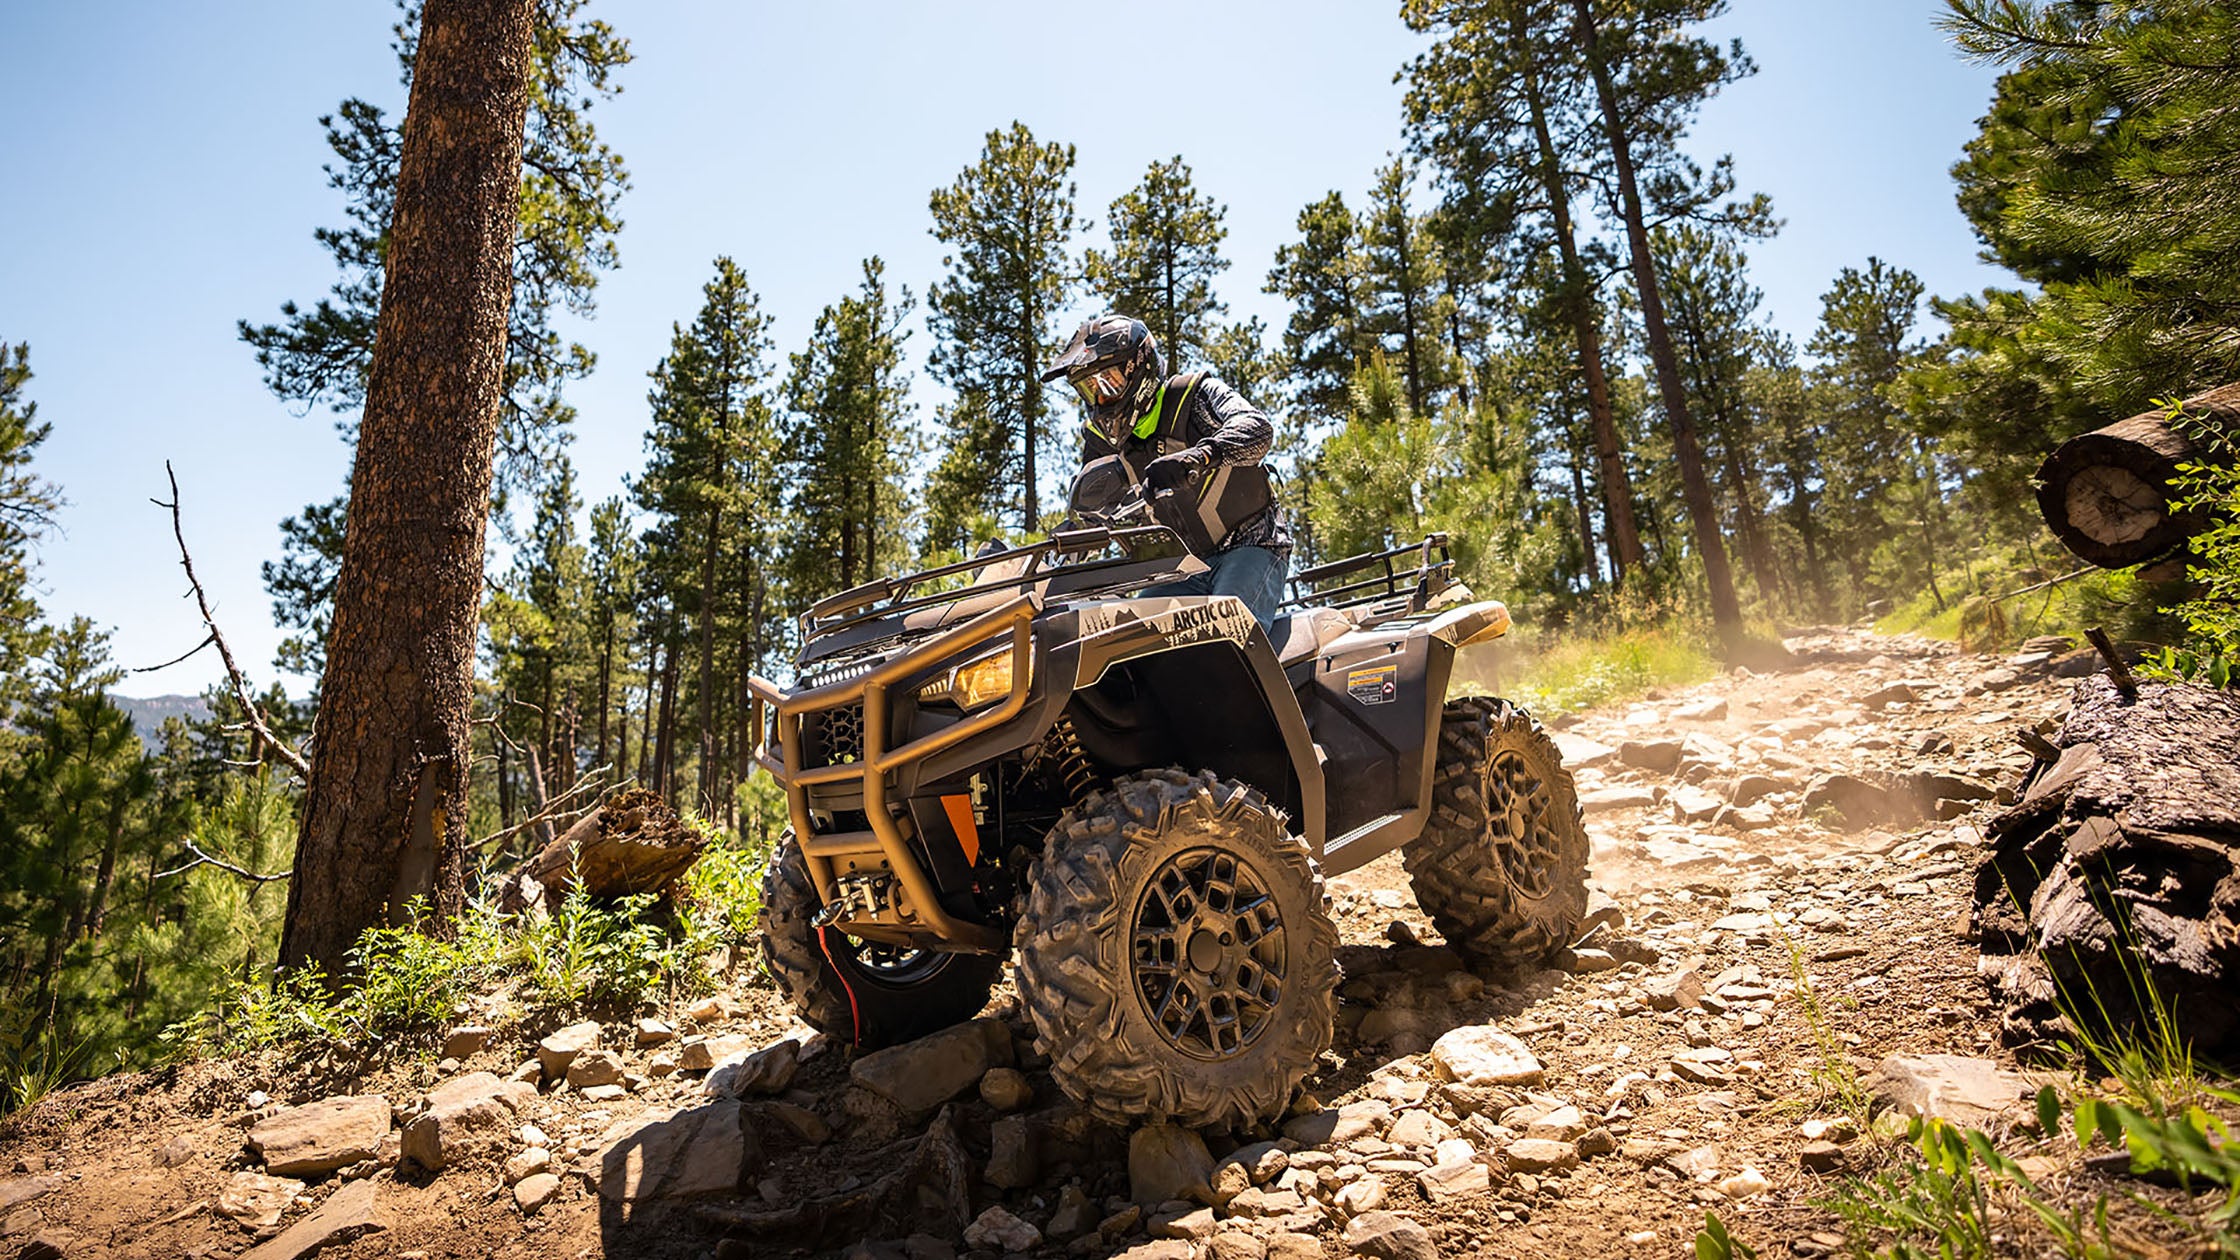 Arctic Cat ATV in action, speeding through nature with a PERFEX Industries lift kit, showcasing enhanced performance and rugged outdoor capability.